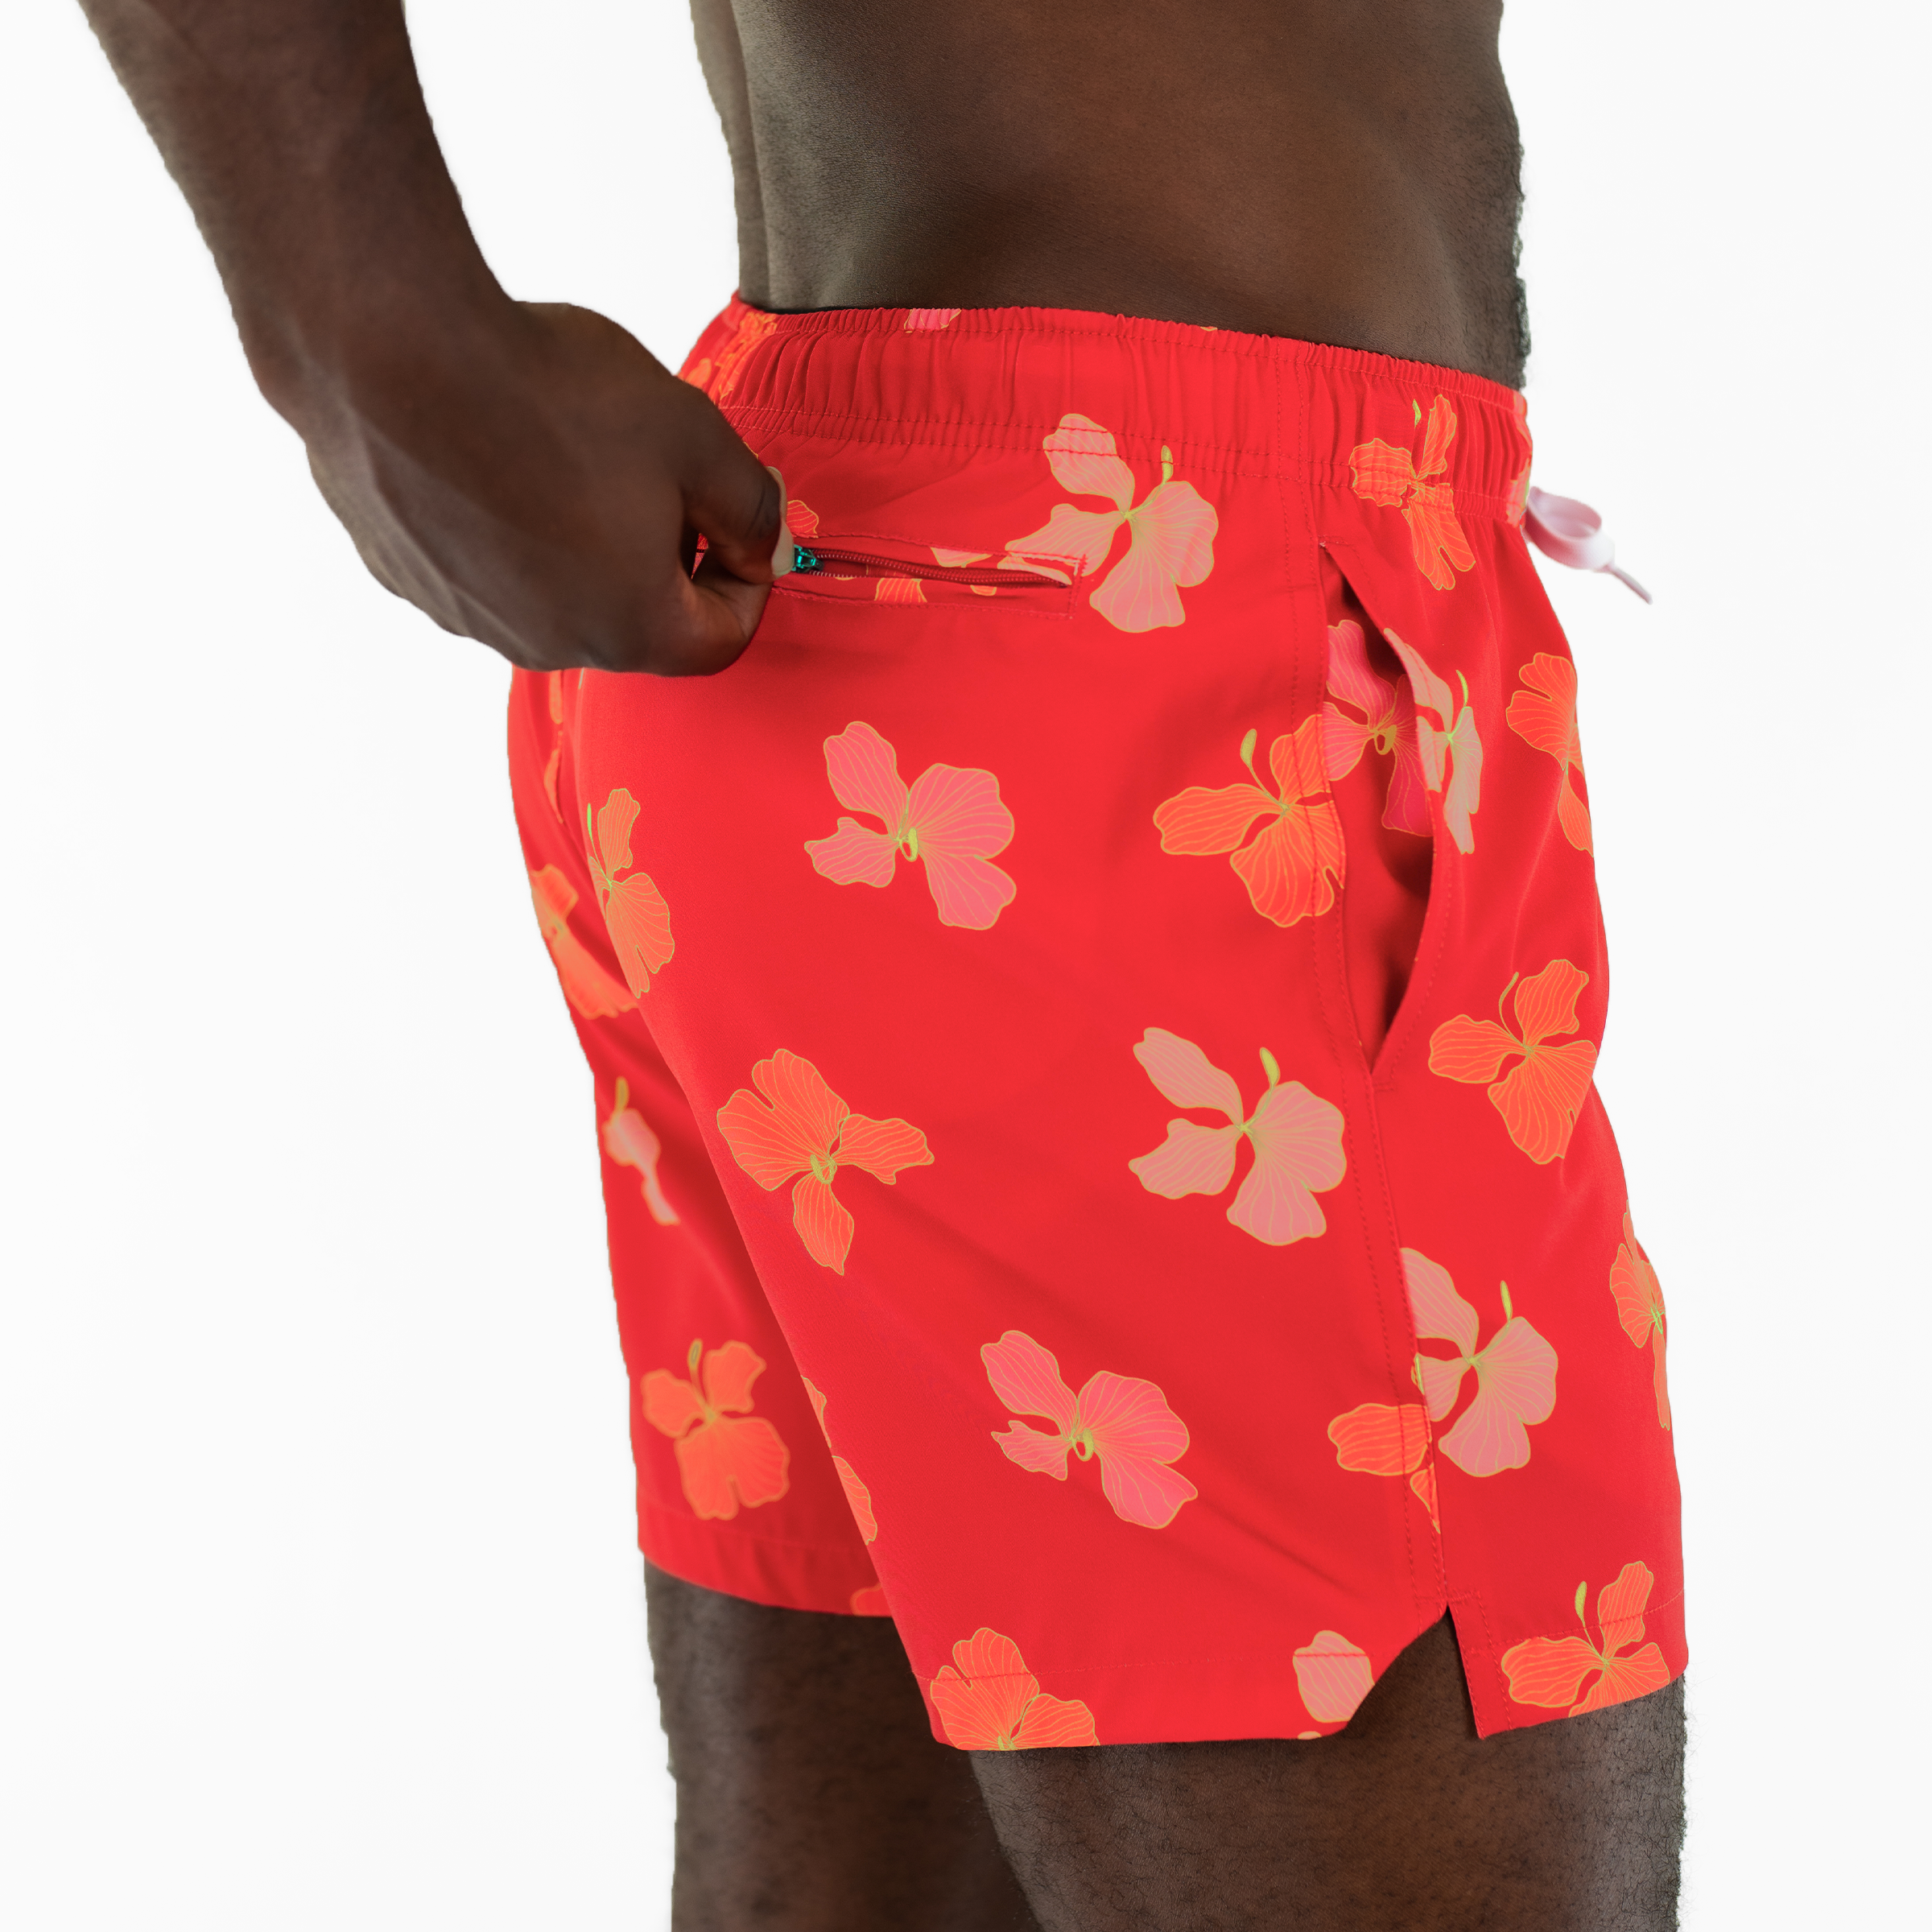 Stretch Swim 5.5" Hibiscus back on model zipping back right zippered pocket